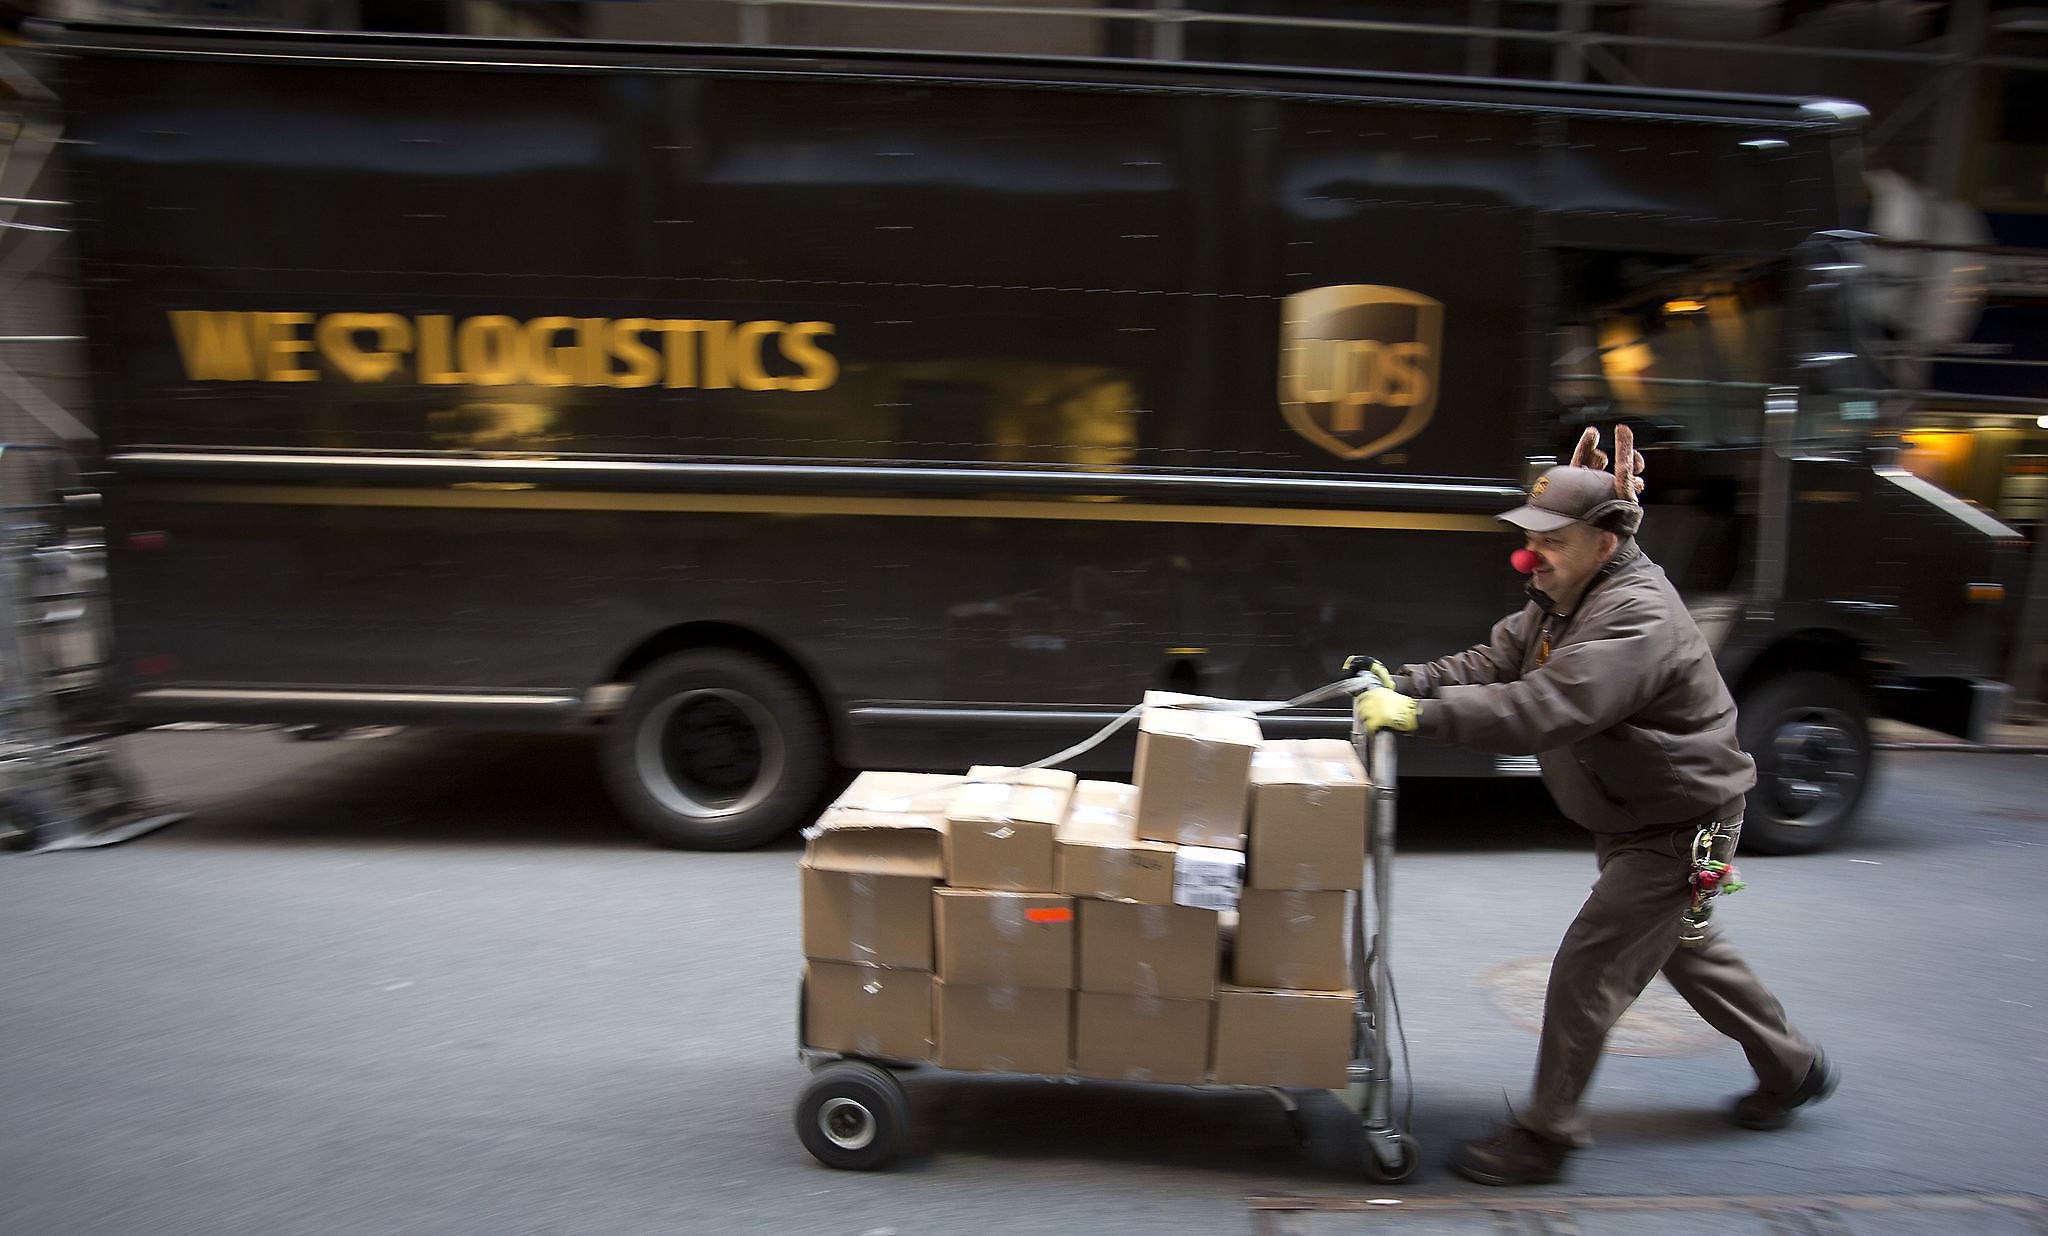 A UPS delivery man prepares to deliver packages on Christmas Eve in New York